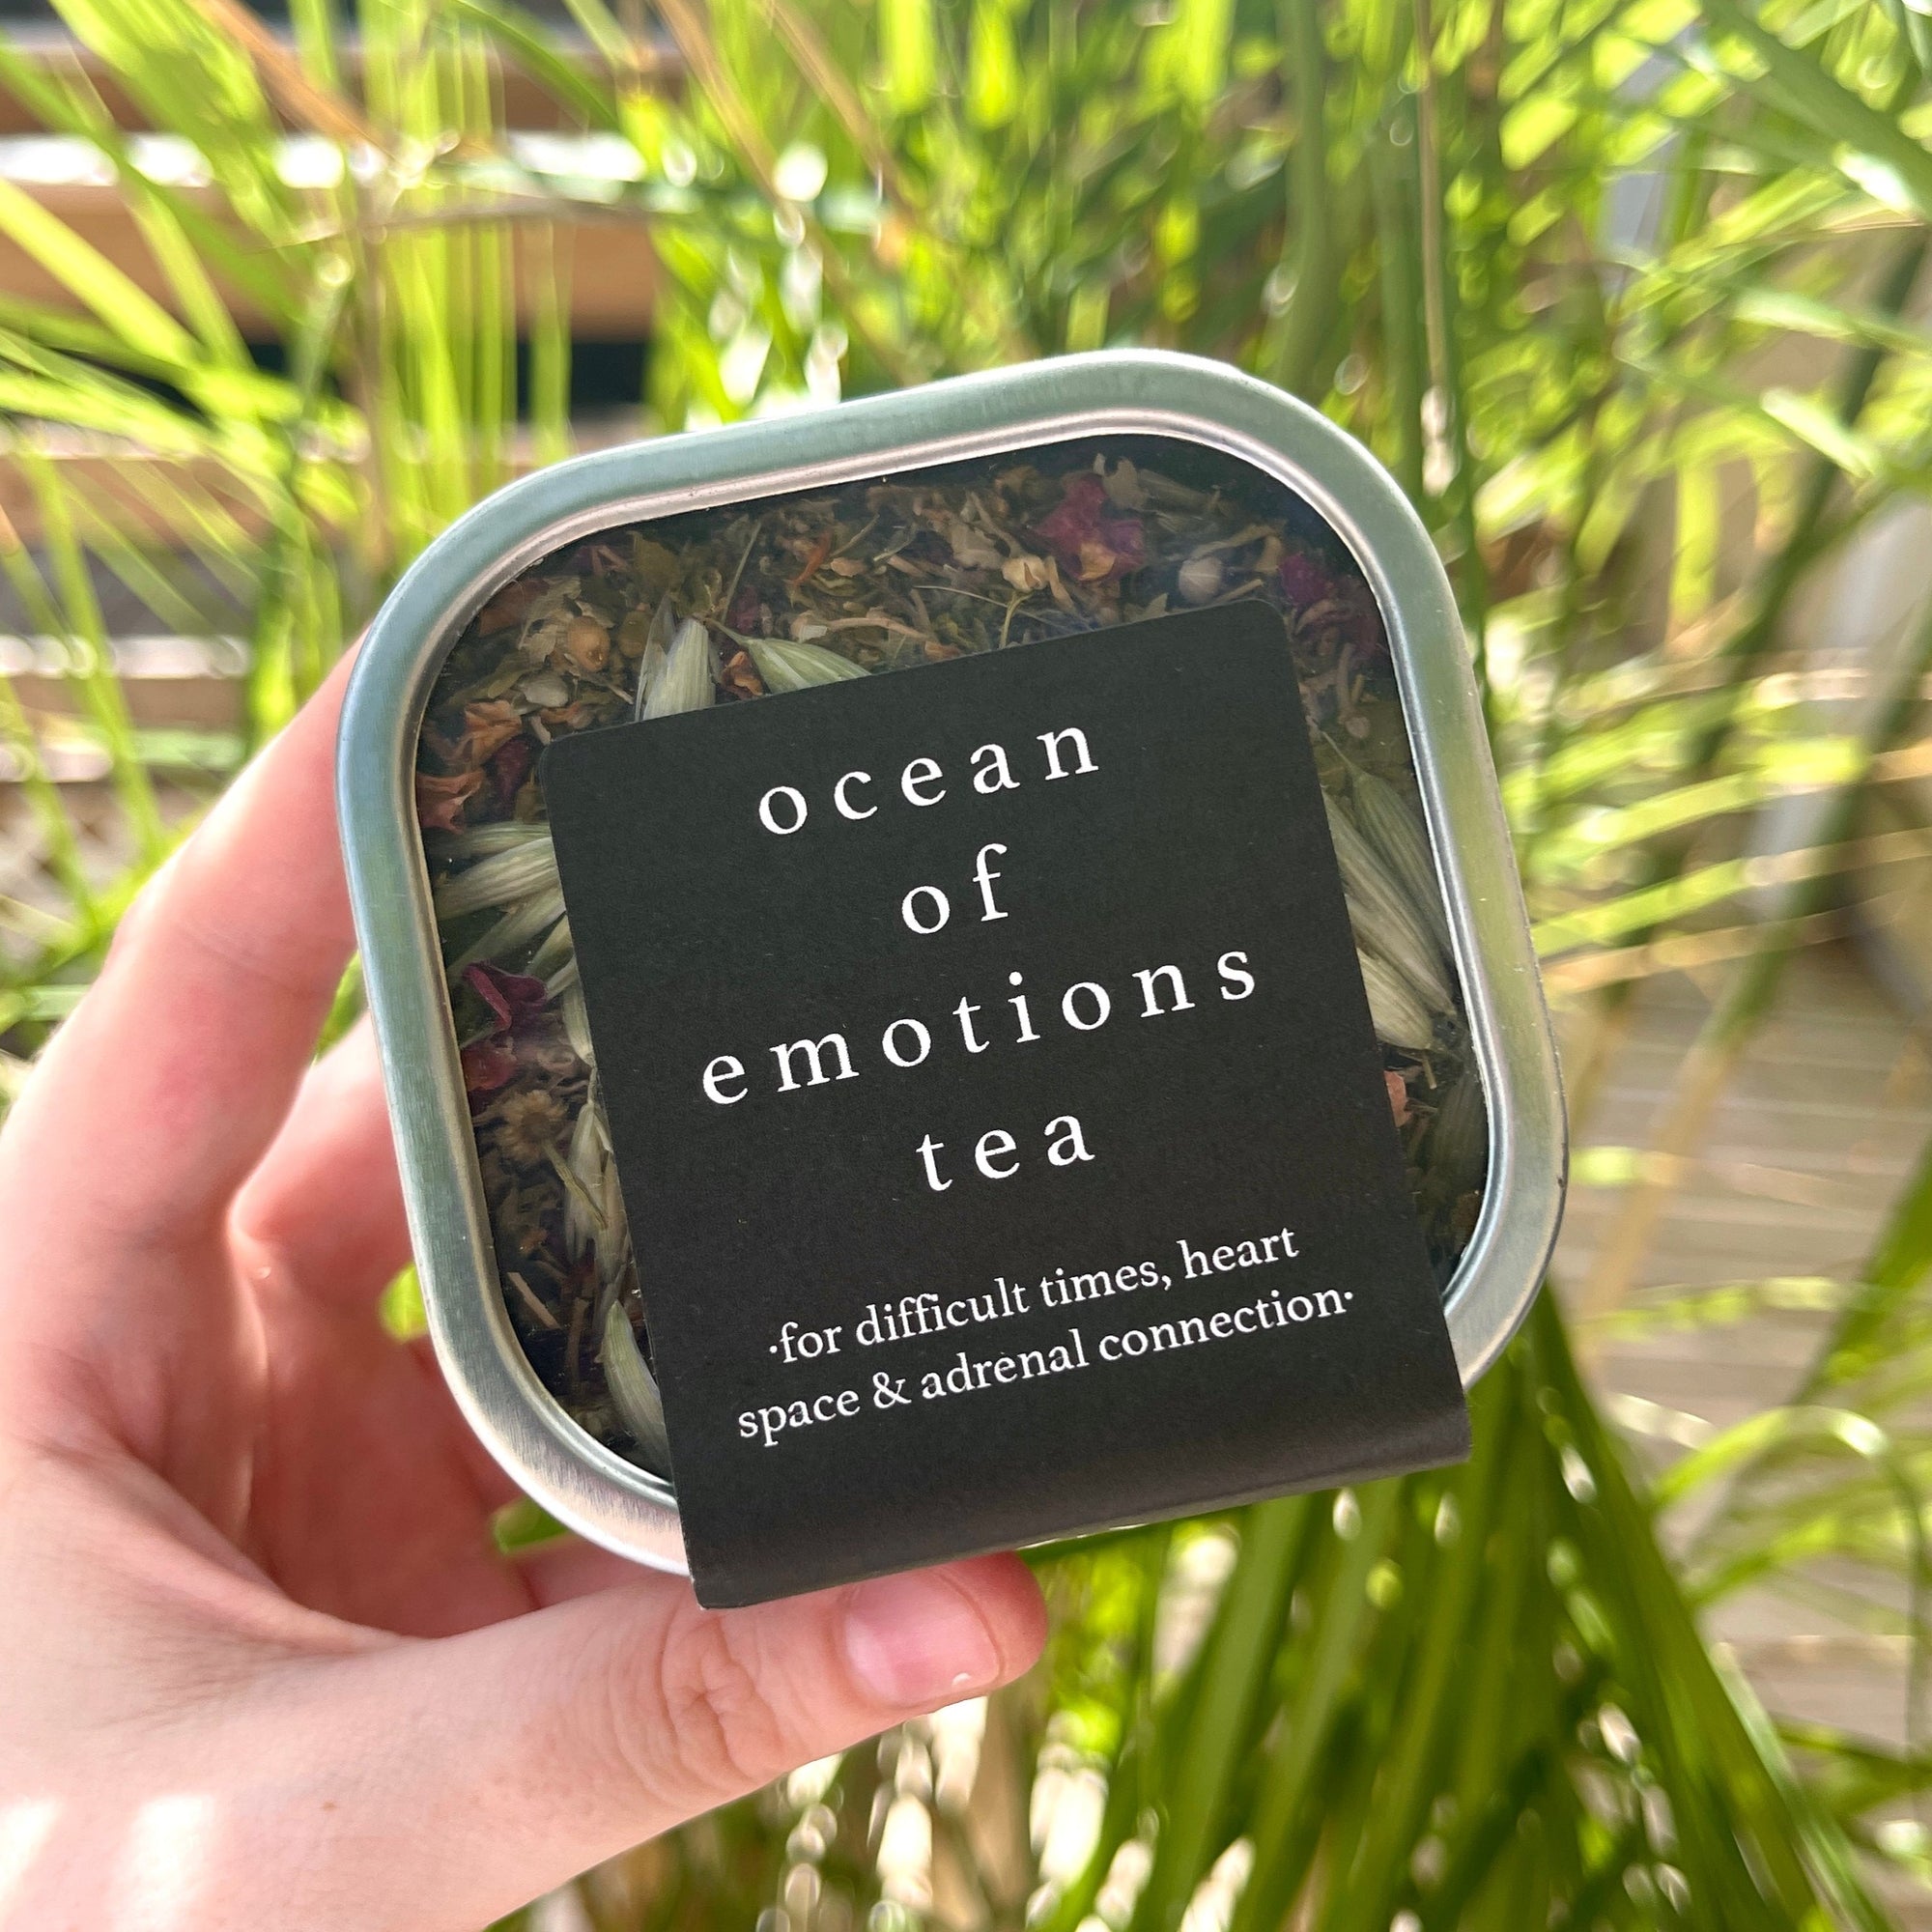 Ocean of Emotions Tea 2.5 ounces. The Ocean of Emotions tea was formulated with grounding and adaptogenic herbs to aid in heartbreaking and difficult times. This tea helps with healing your heart space and supports your adrenals.